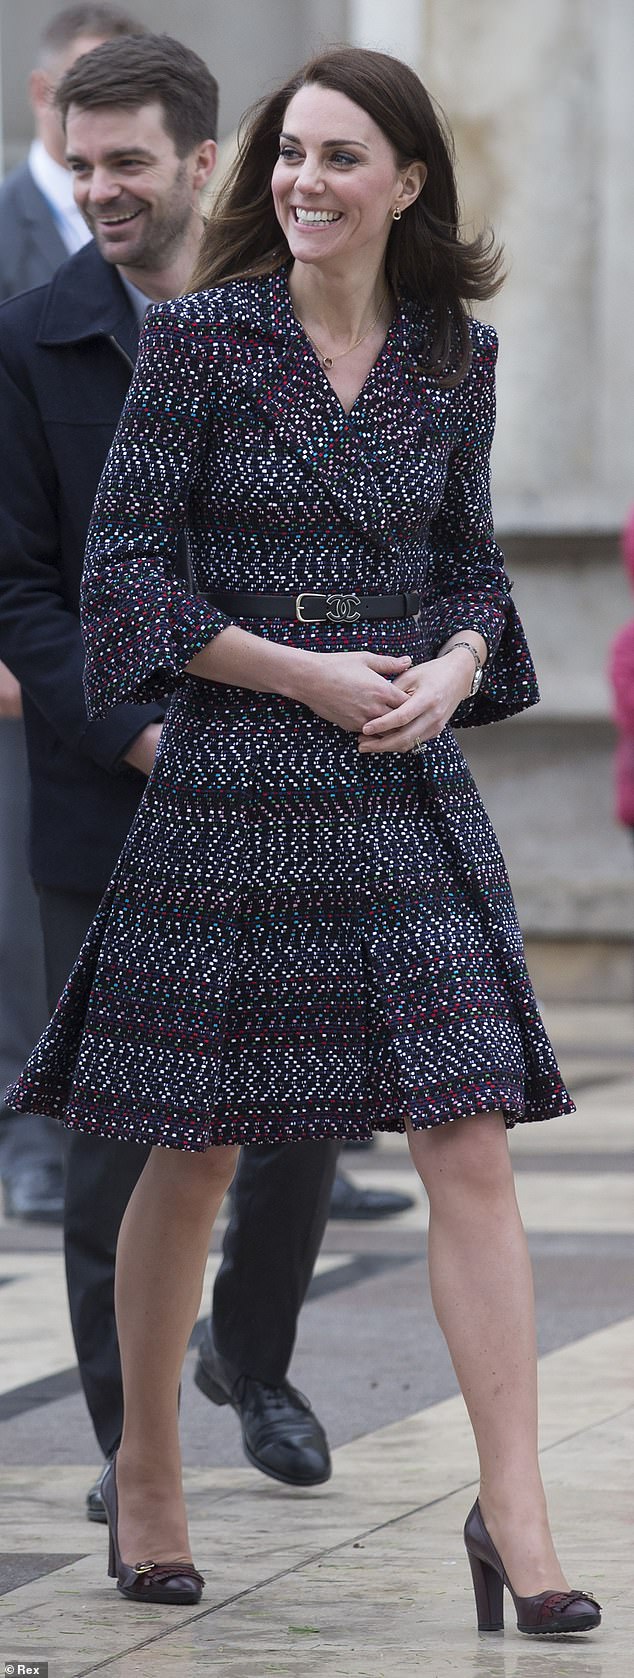 Kate Middleton arriving at an event at the Trocadero in Paris, France in 2017